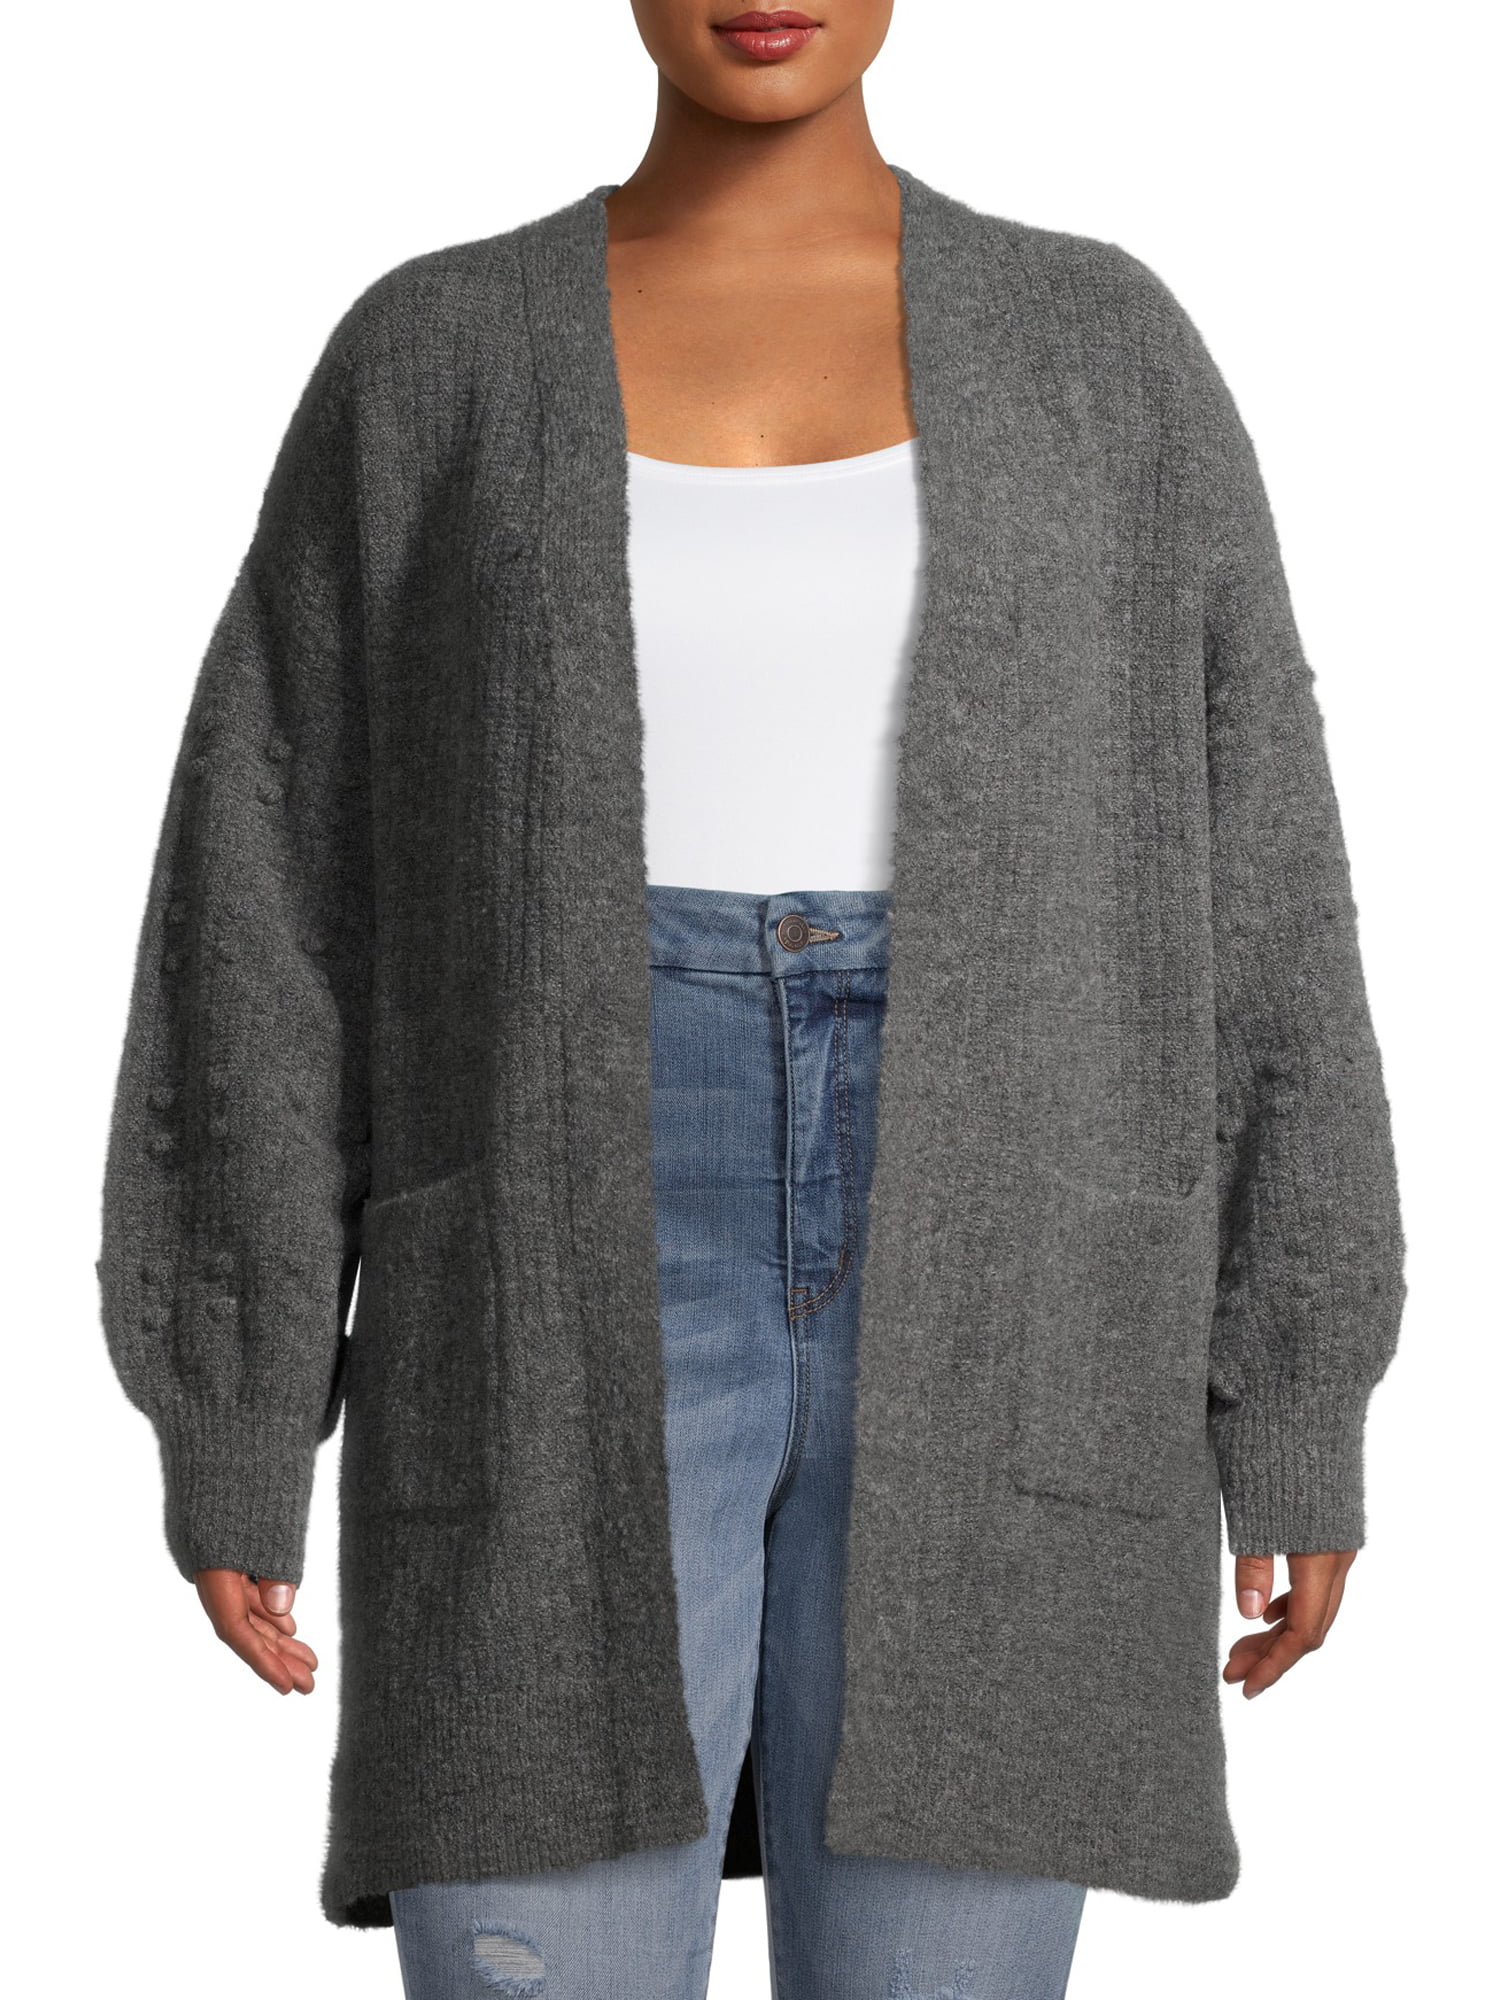 Terra & Sky Women\'s Plus Size Open-Front Super Soft Duster Cardigan with  Popcorn Stitch Sleeves